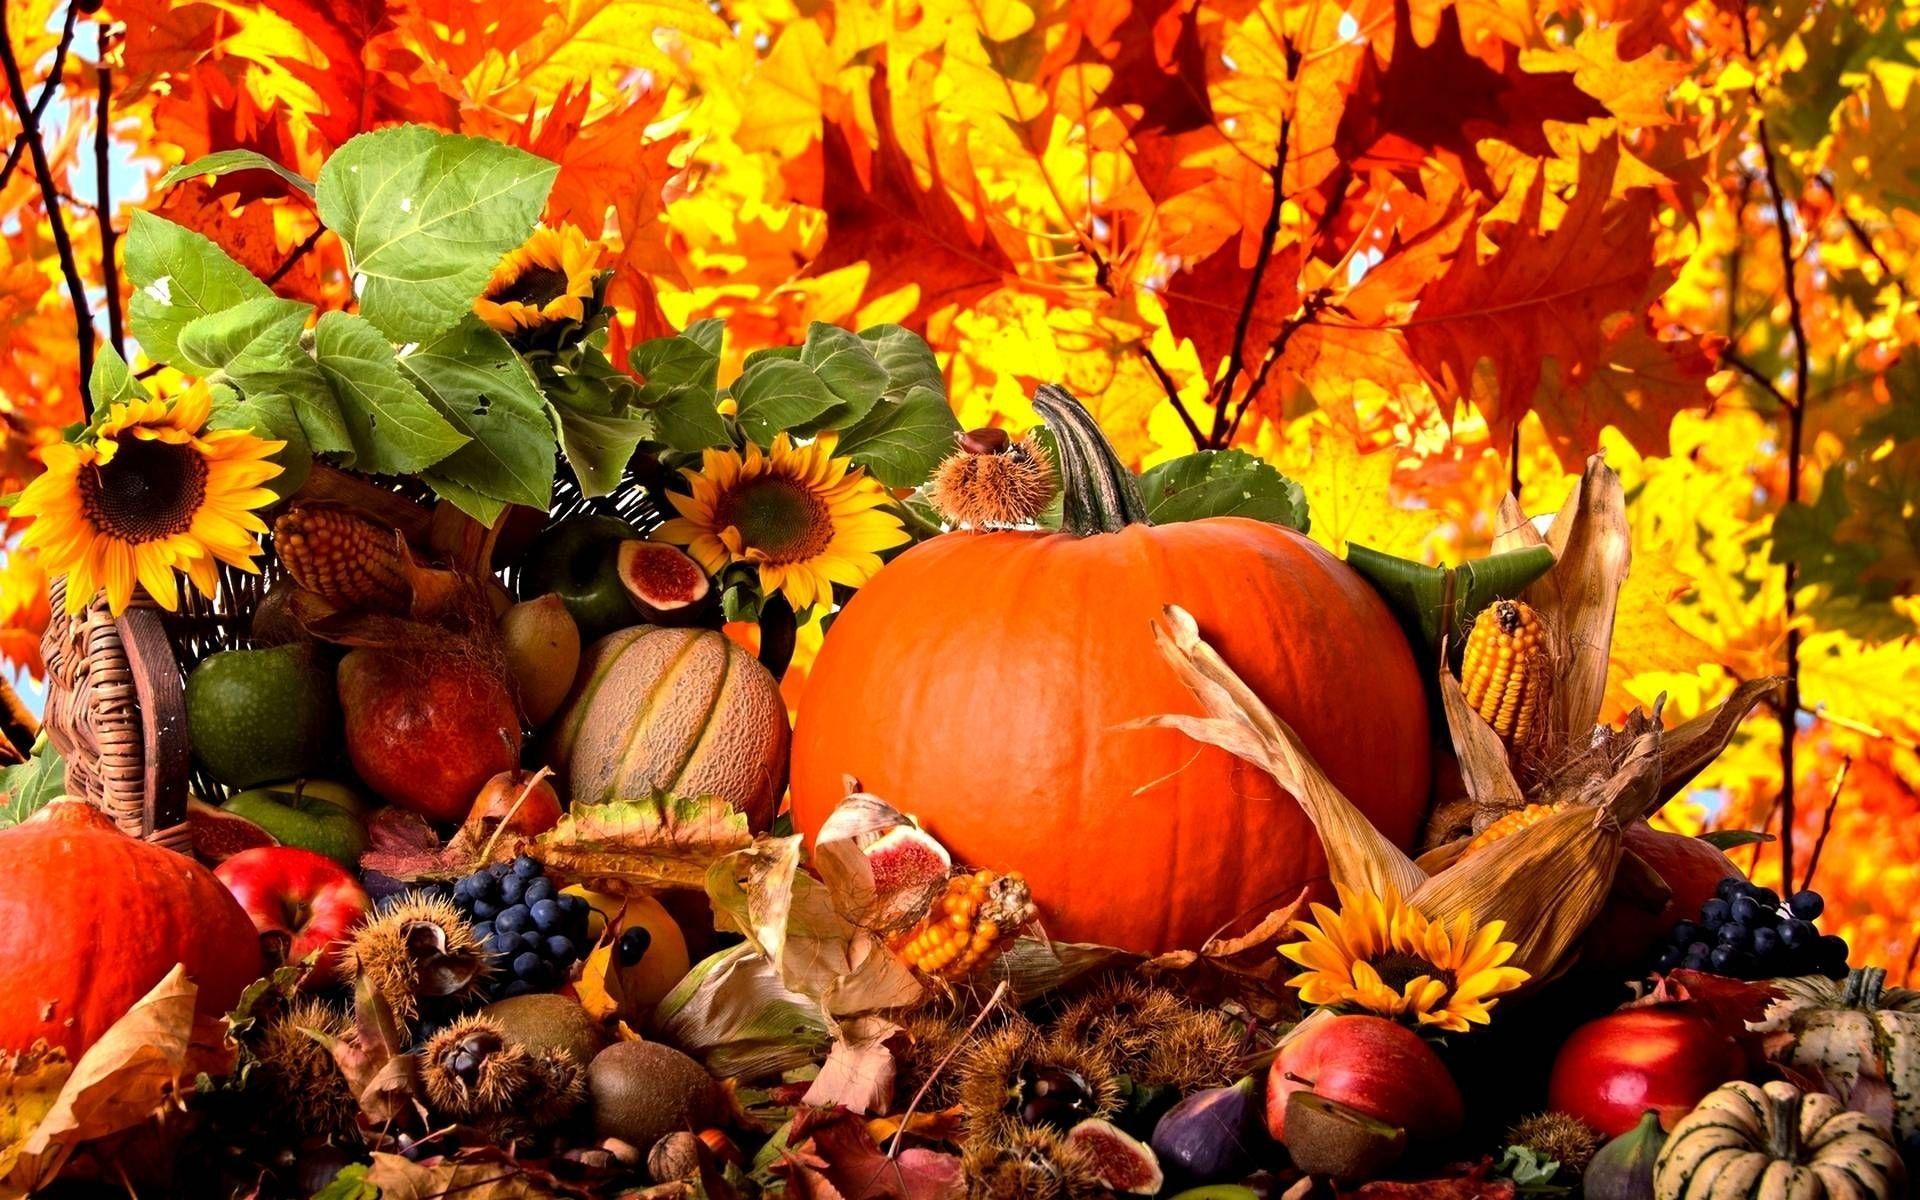 Pumpkin and Autumn Leaves Wallpaper Awesome Fall Harvest Wallpaper